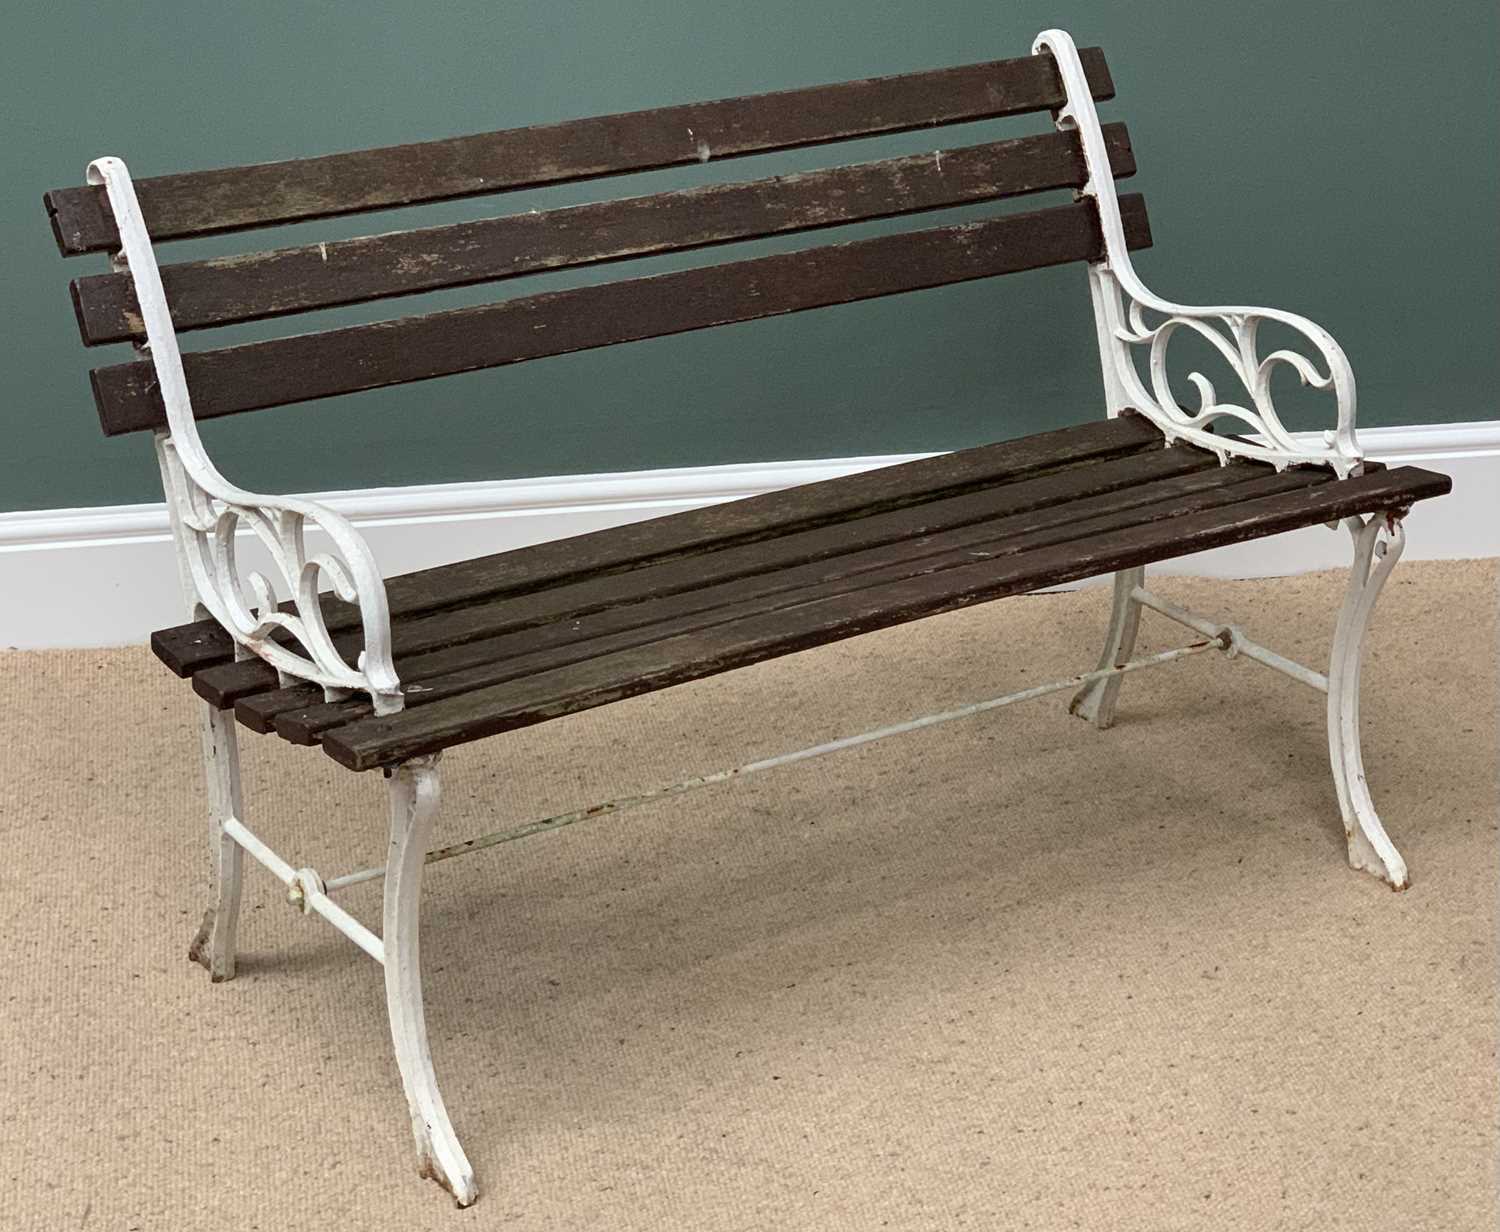 GARDEN BENCH with white painted cast metal ends and stretcher, the seat and back with wooden